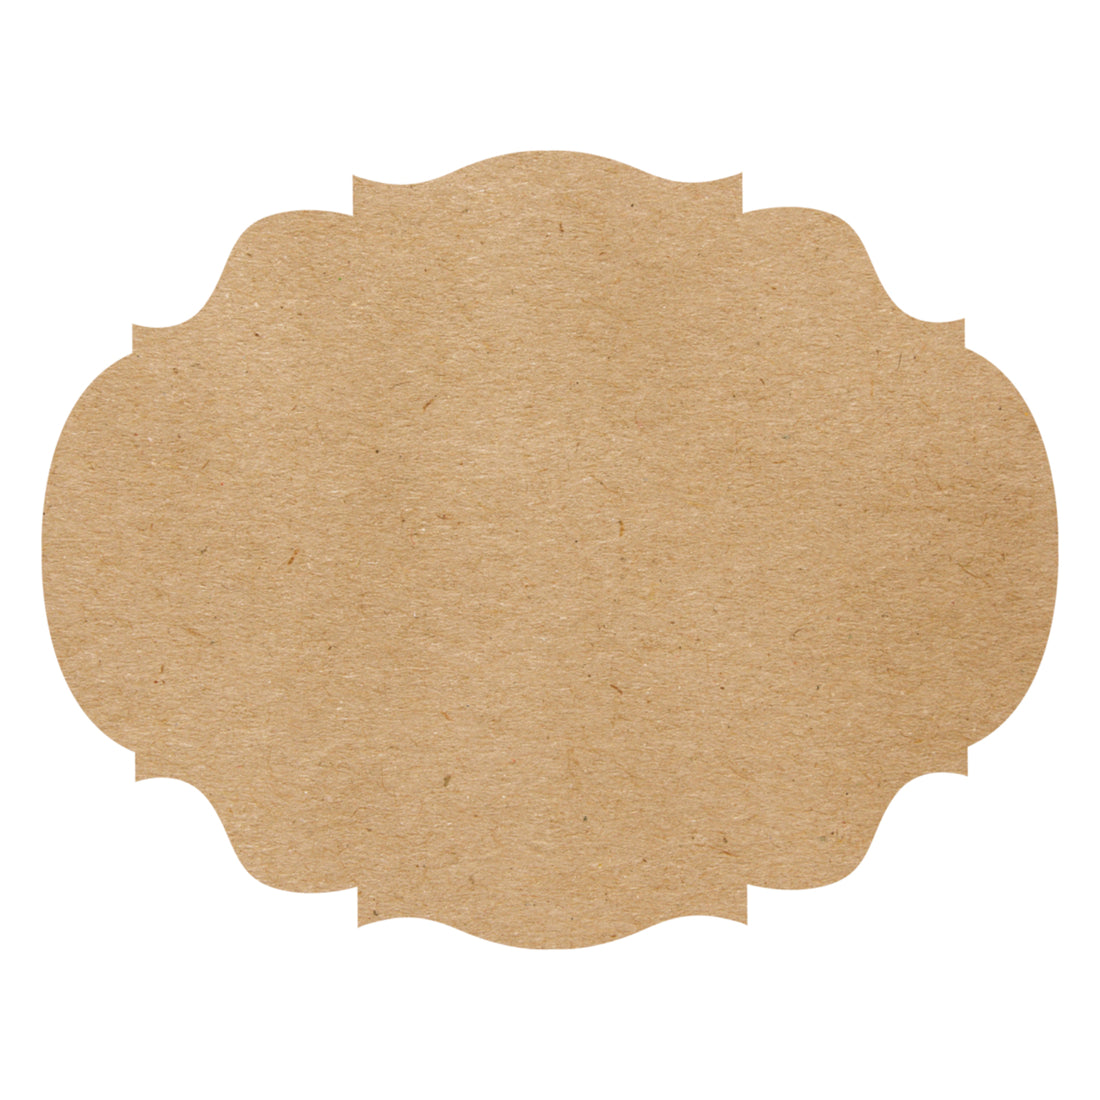 A tan kraft paper placemat with scalloped edge.